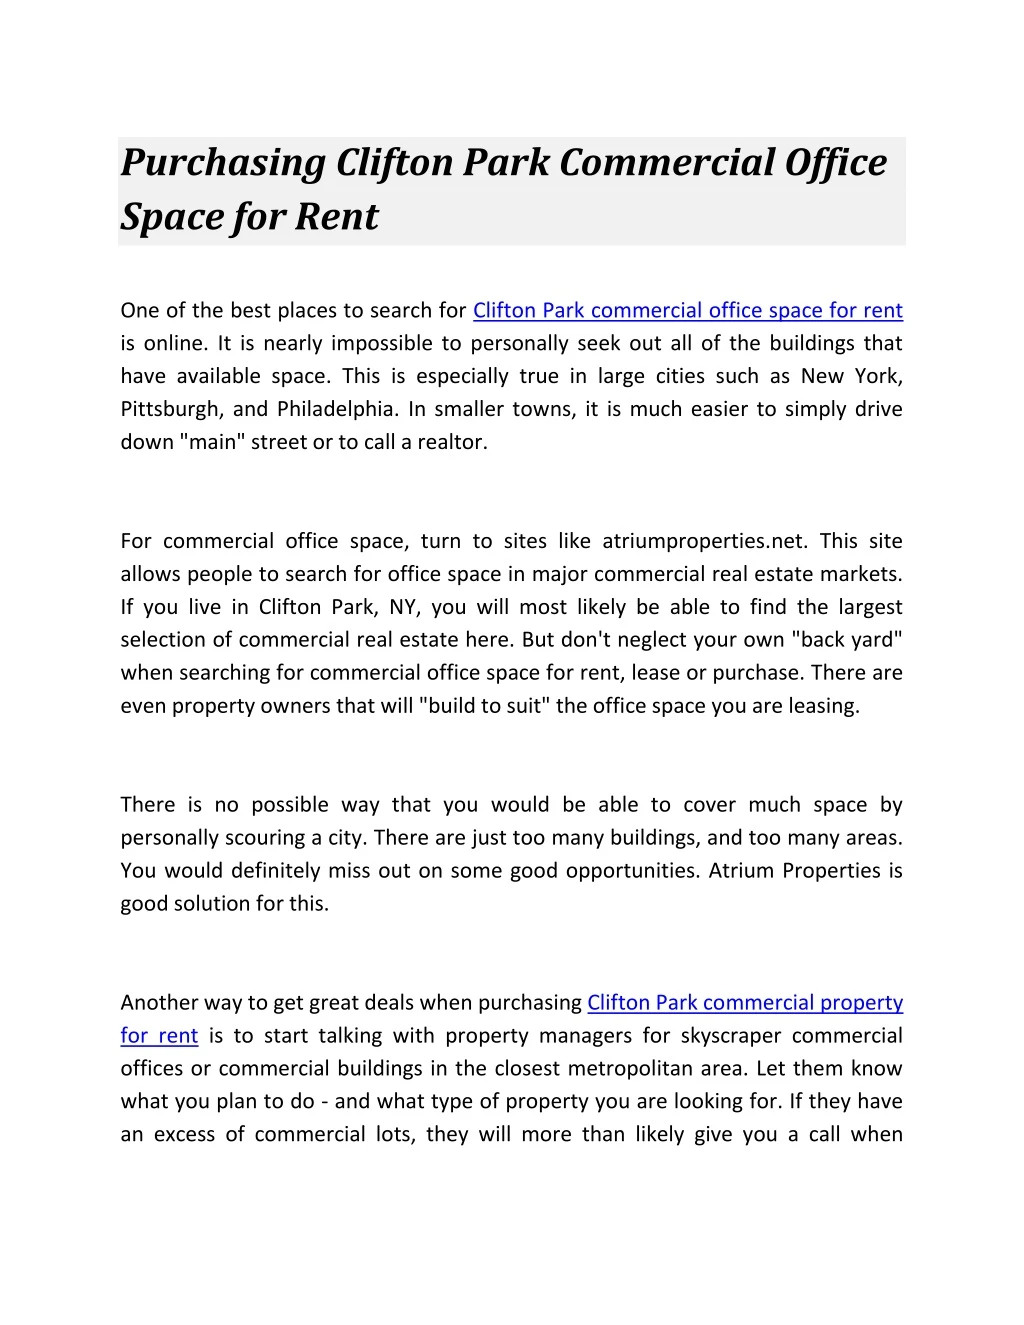 purchasing clifton park commercial office space